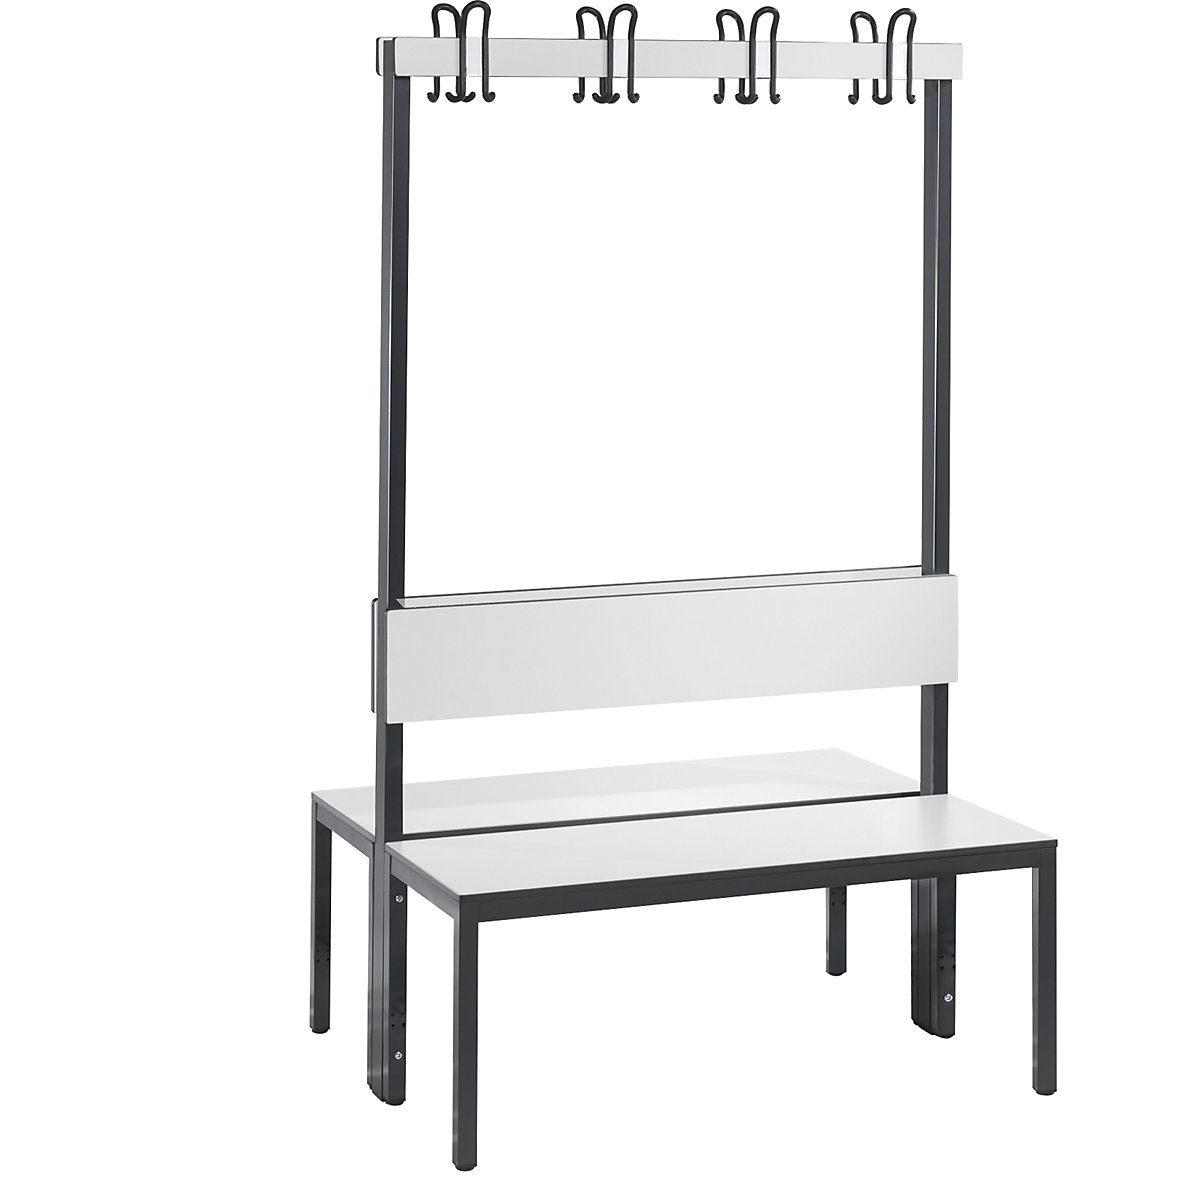 BASIC PLUS cloakroom bench, double sided – C+P